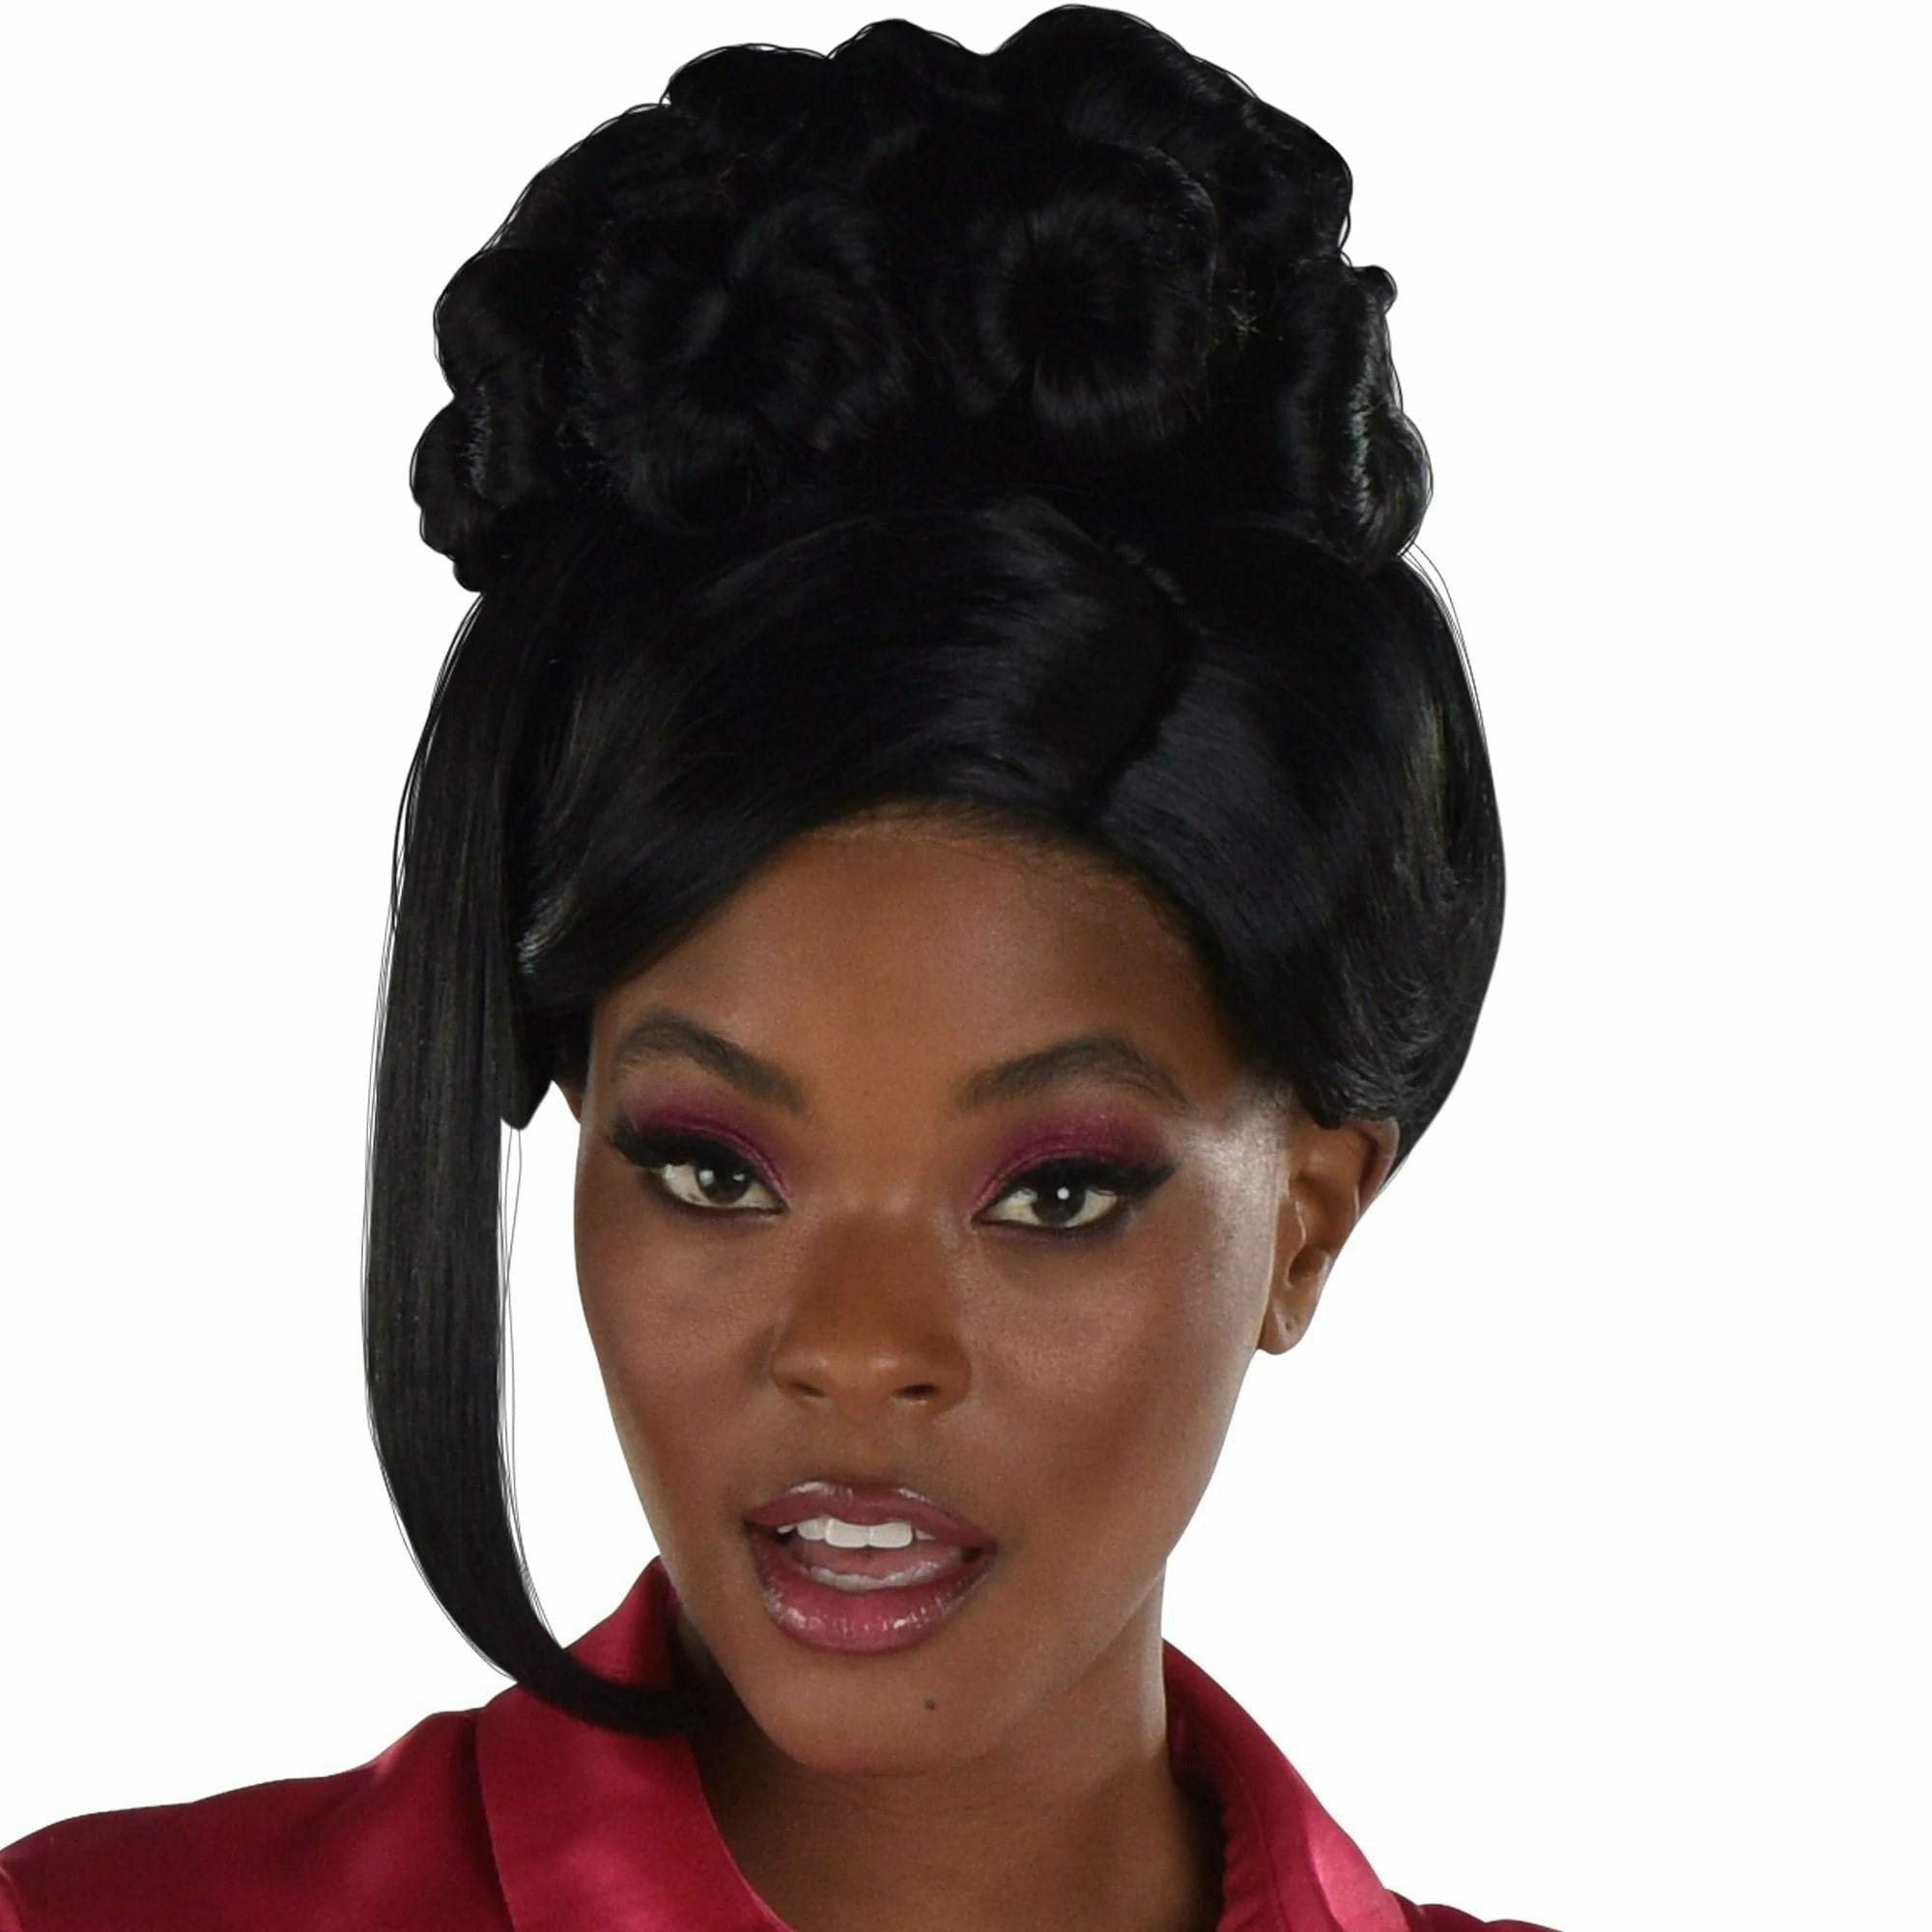 Amscan COSTUMES: WIGS Updo Wig